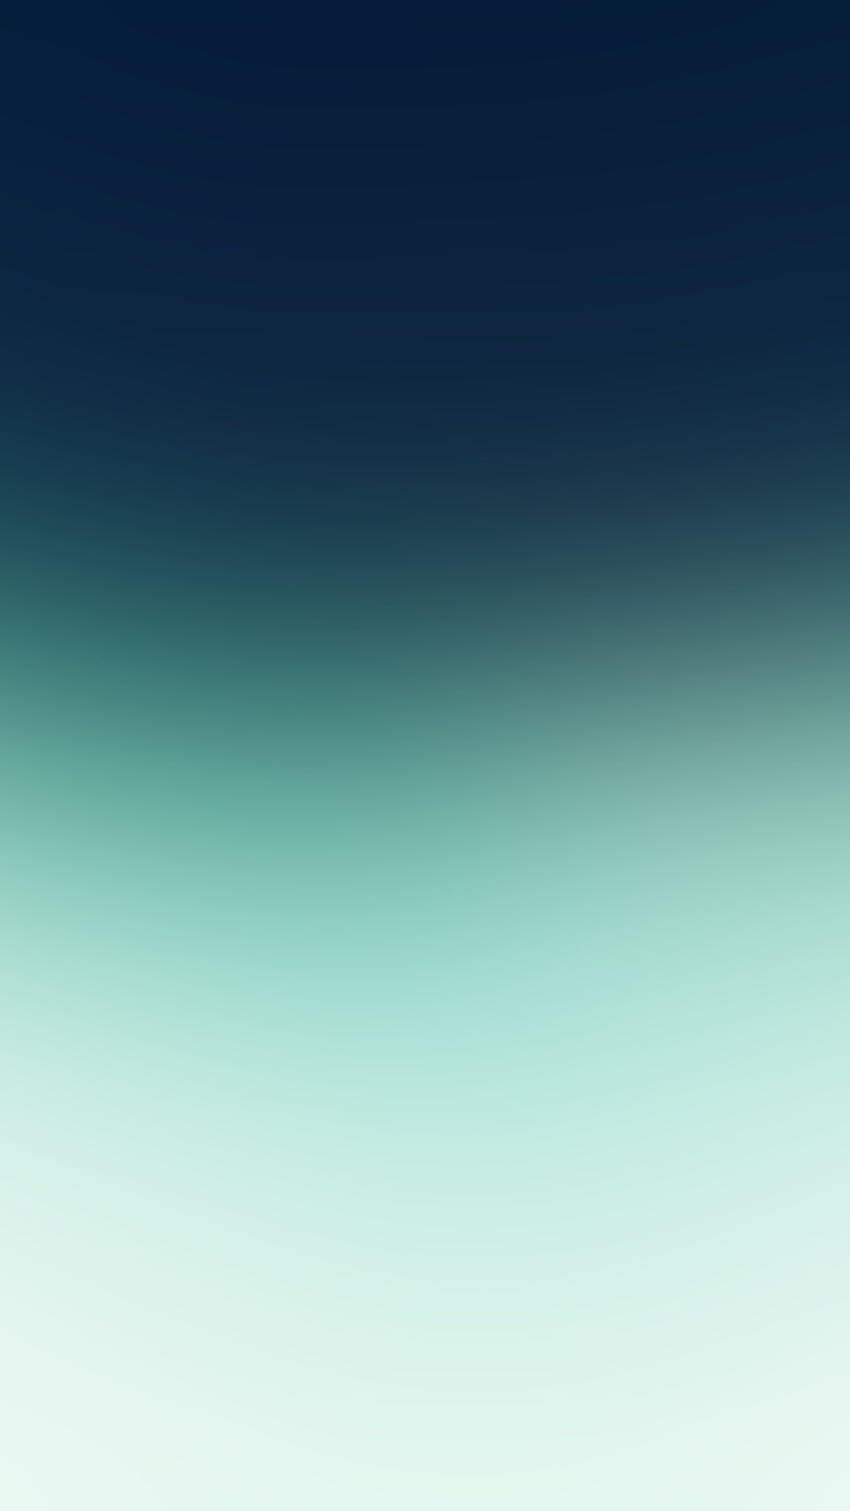 Green Blue Gradient Android Data Src Linear Green Blue Gradient , Pastel Blue Gradient HD phone wallpaper